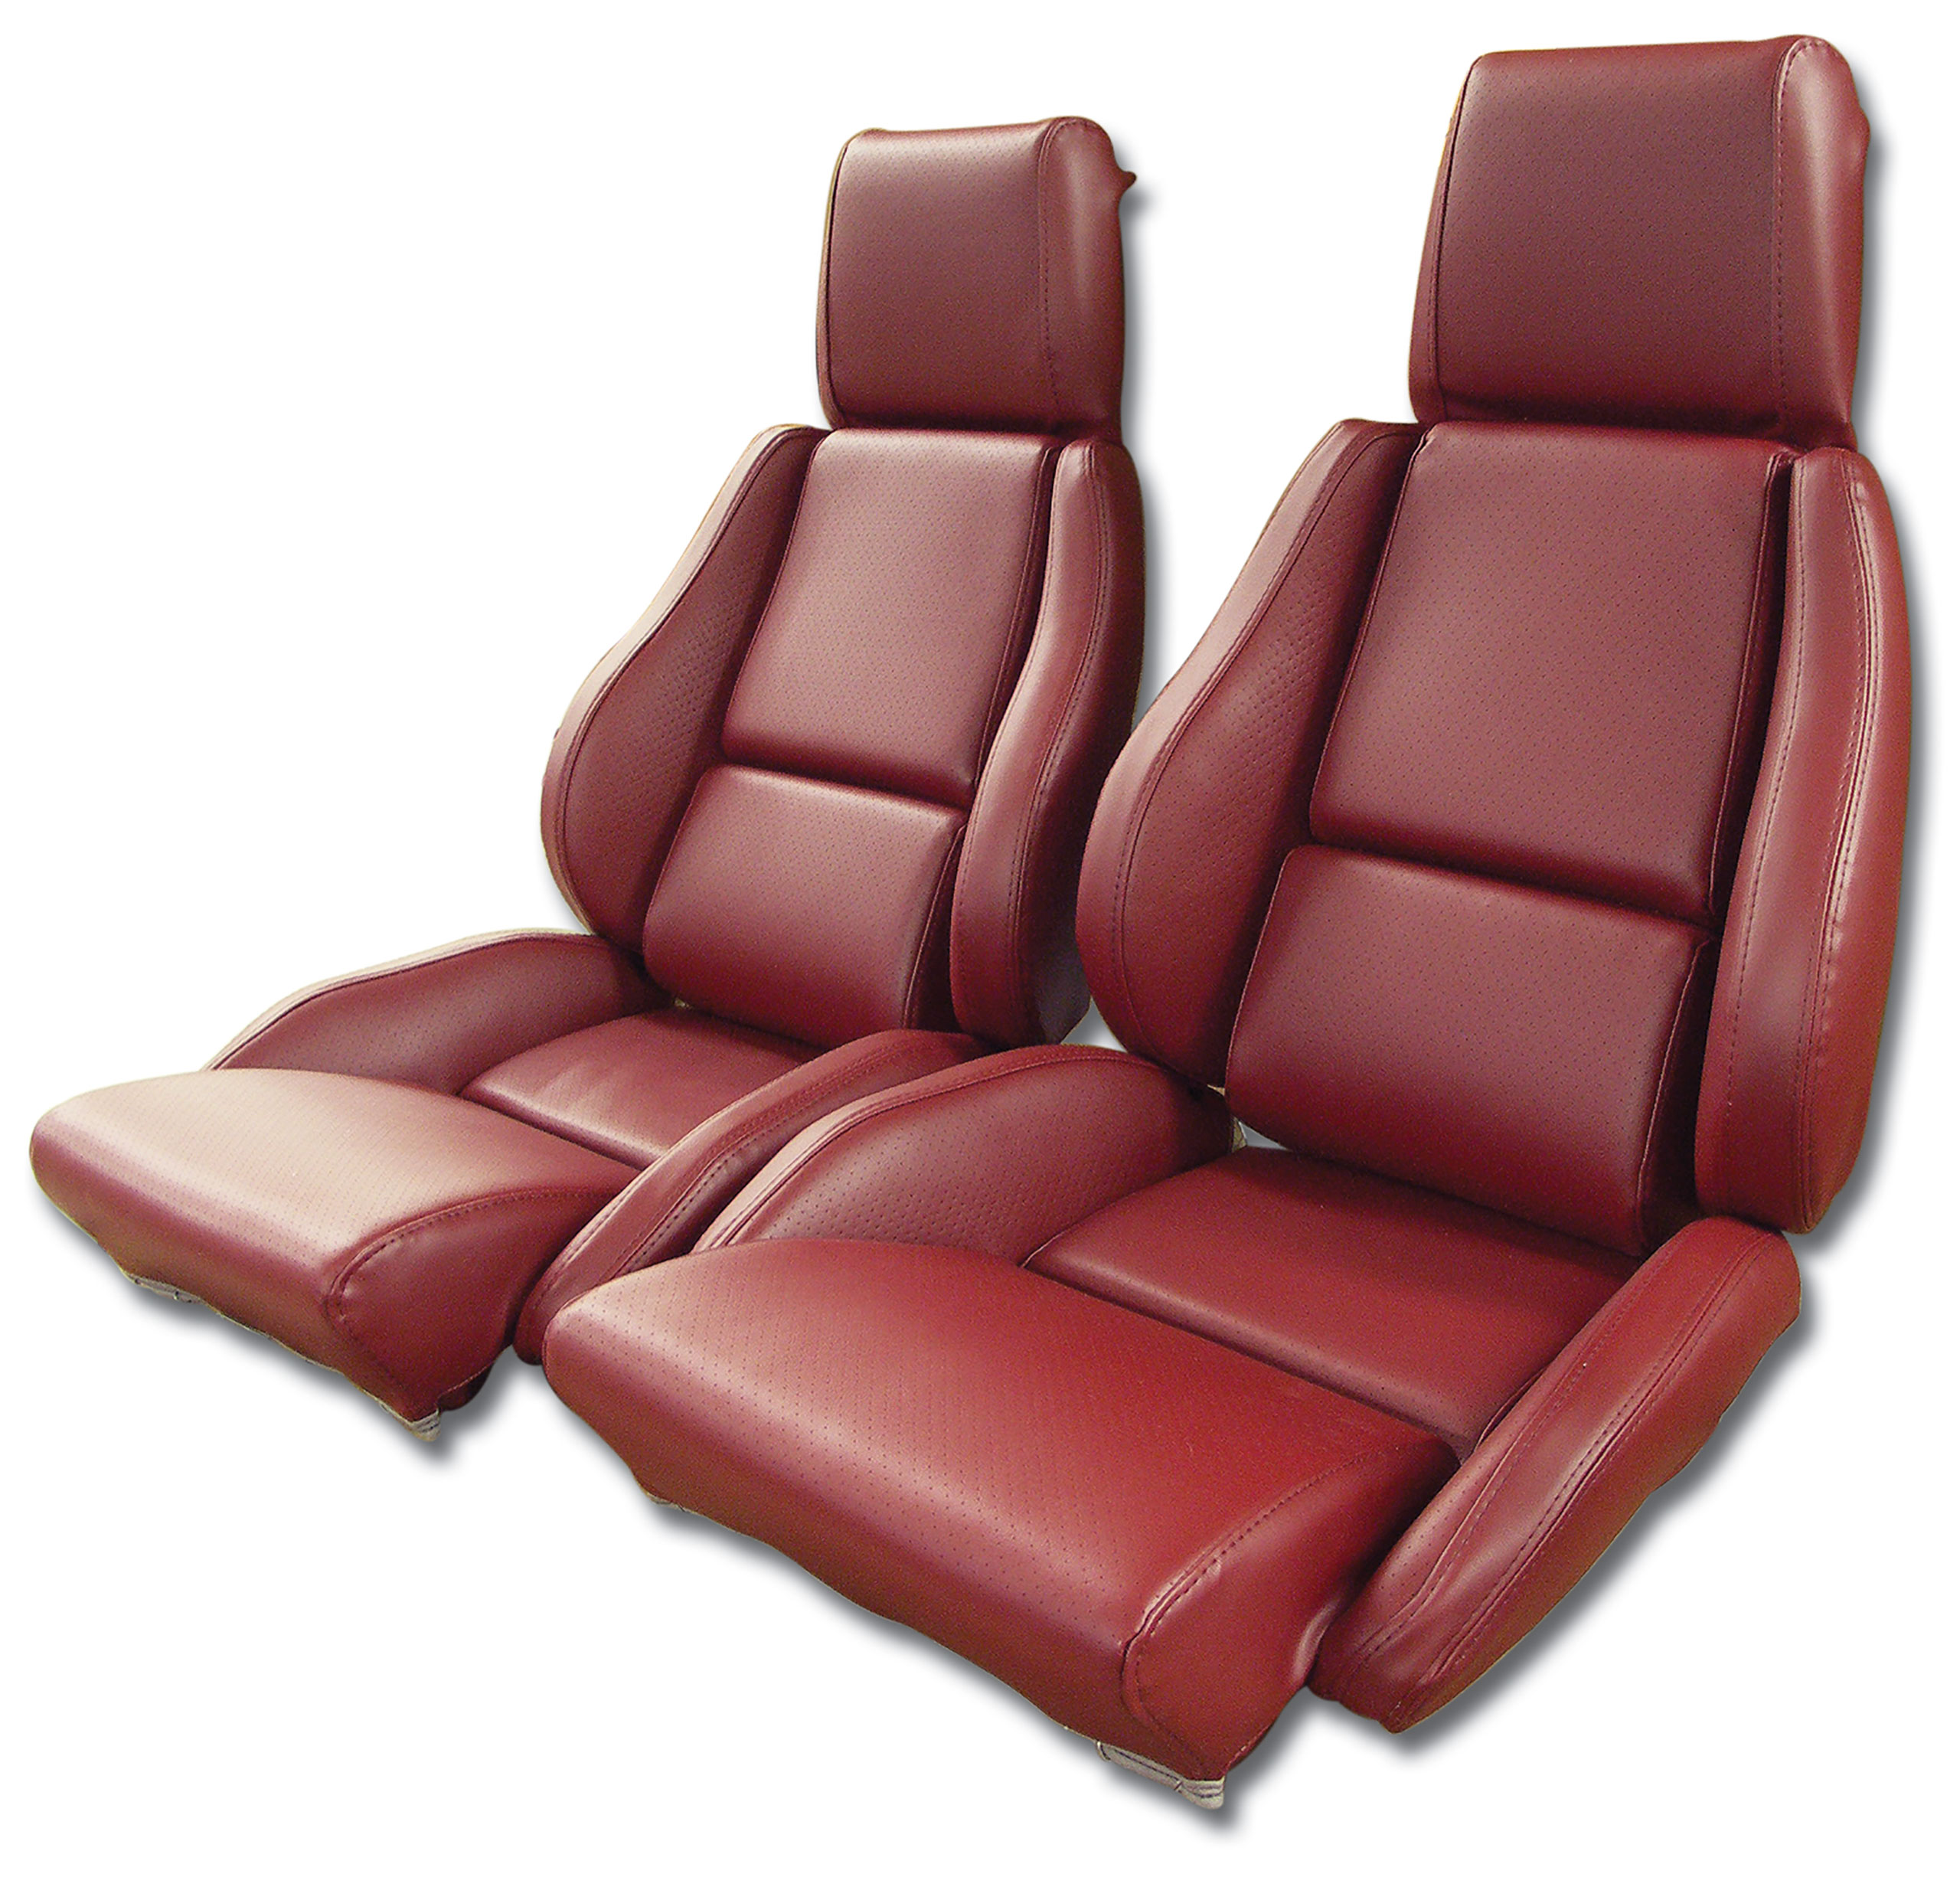 1984-1985 Corvette C4 Mounted "Leather-Like" Vinyl Seat Covers Red Stn CA-422927 